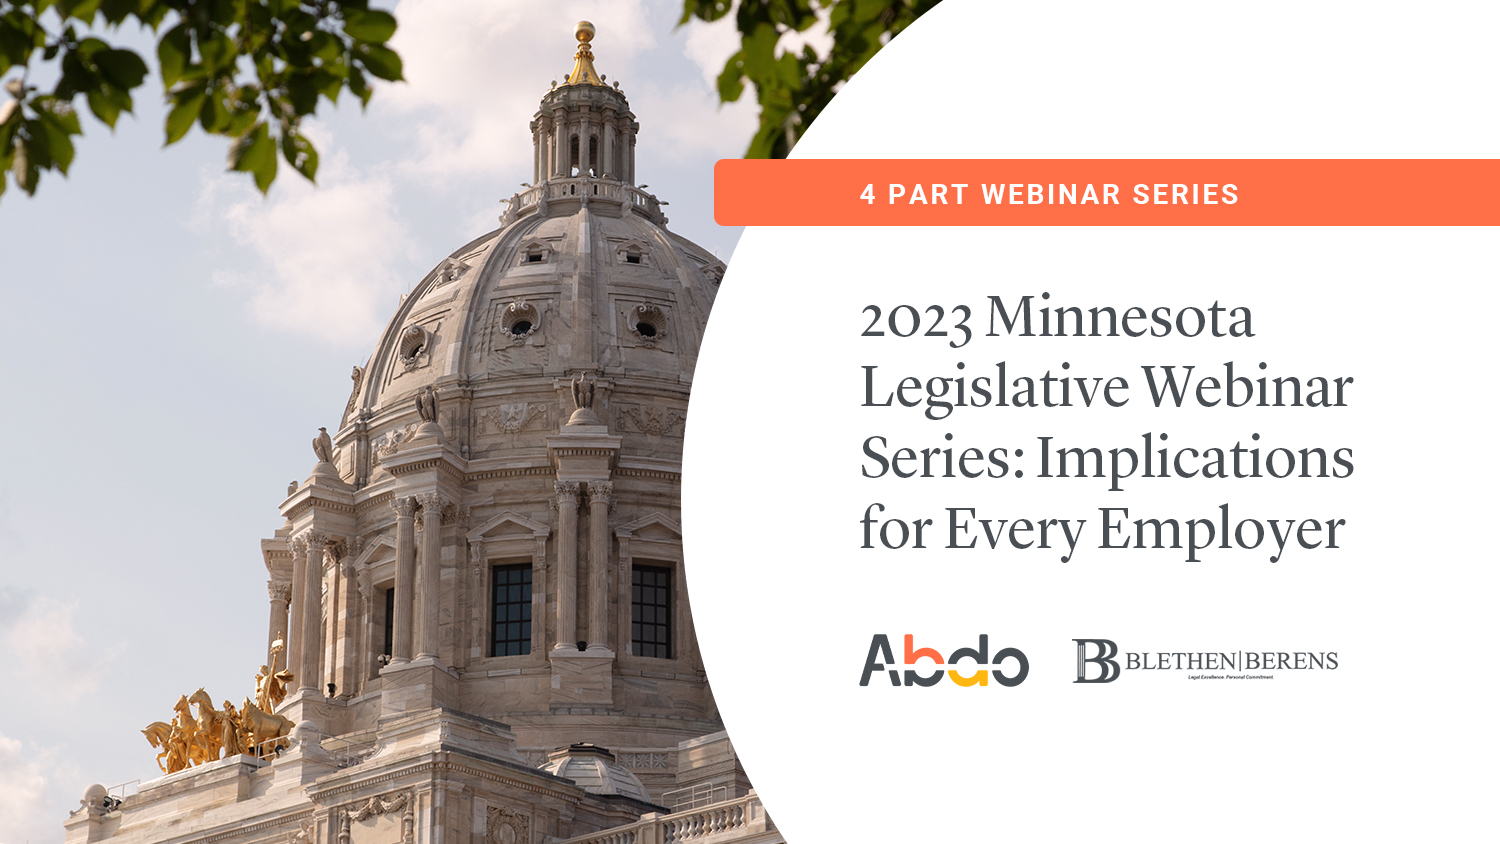 Minnesota Earned Sick and Safe Leave Act (ESSL) Takes Effect January 1